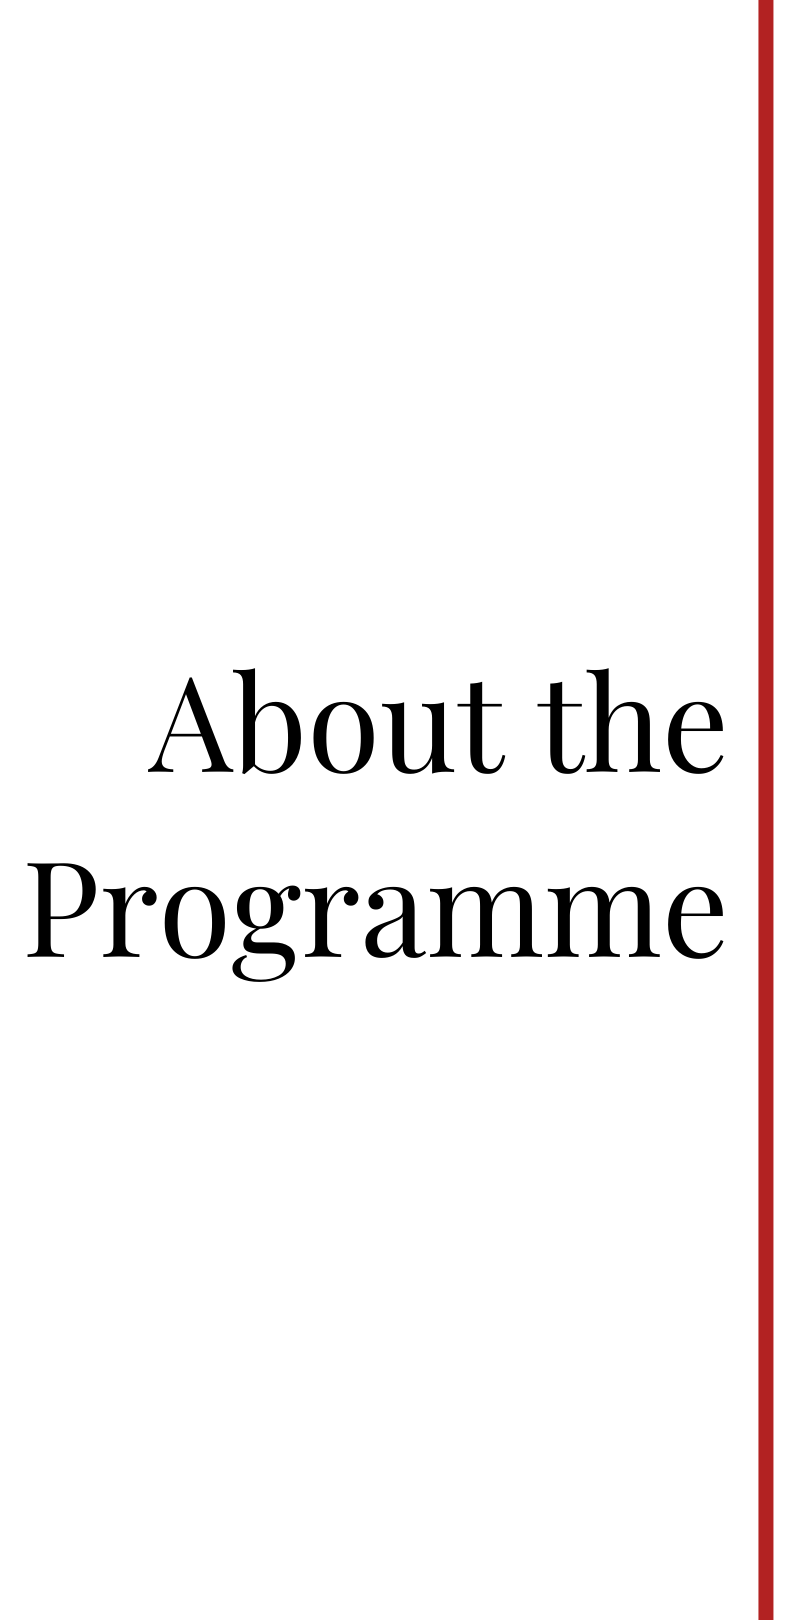 About the Programme